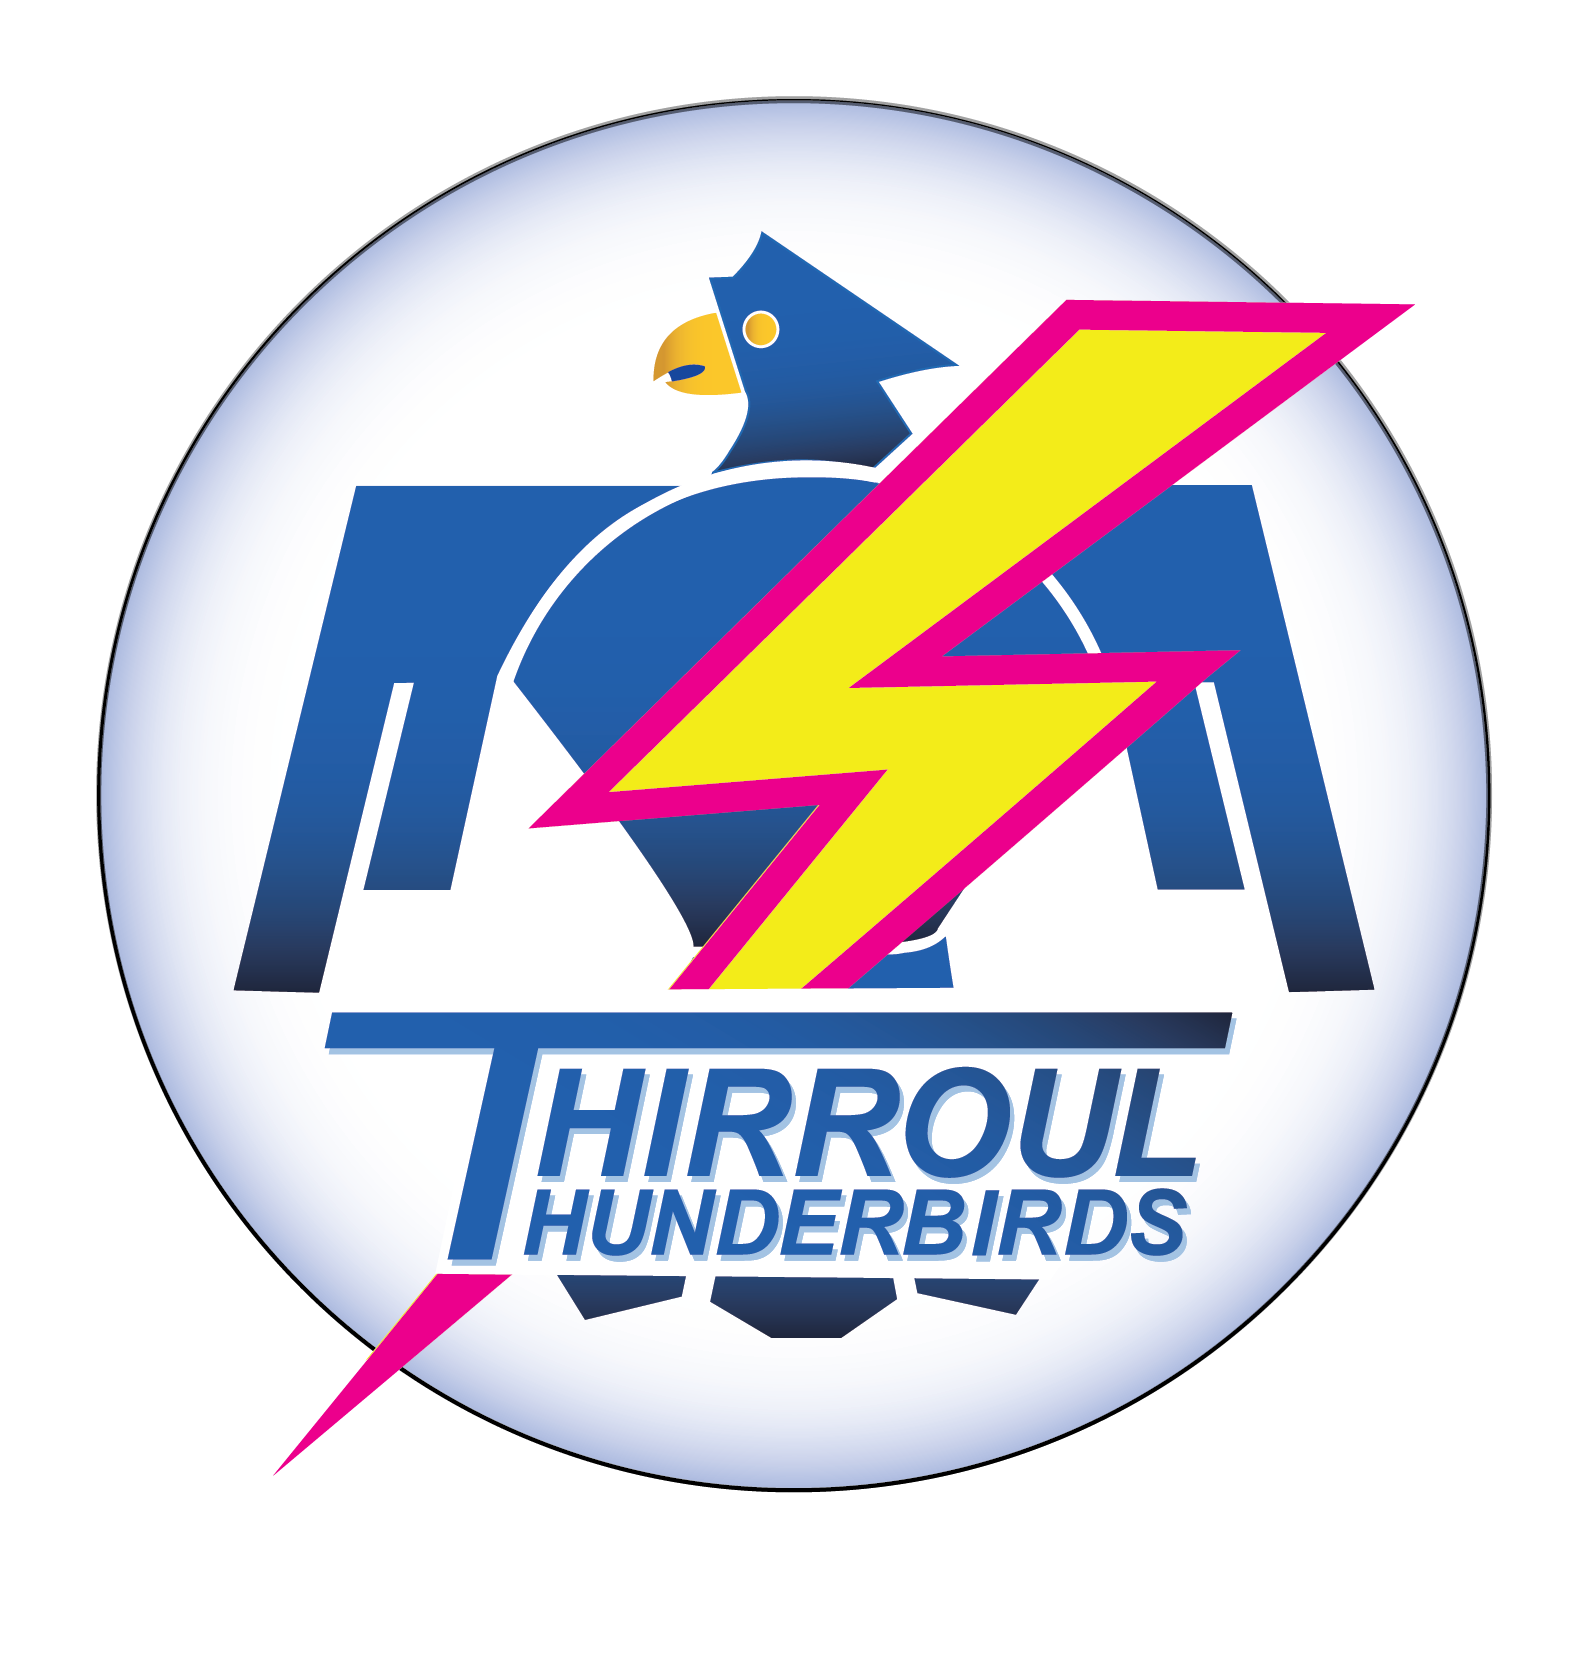 Thirroul Thunderbirds Pink.png